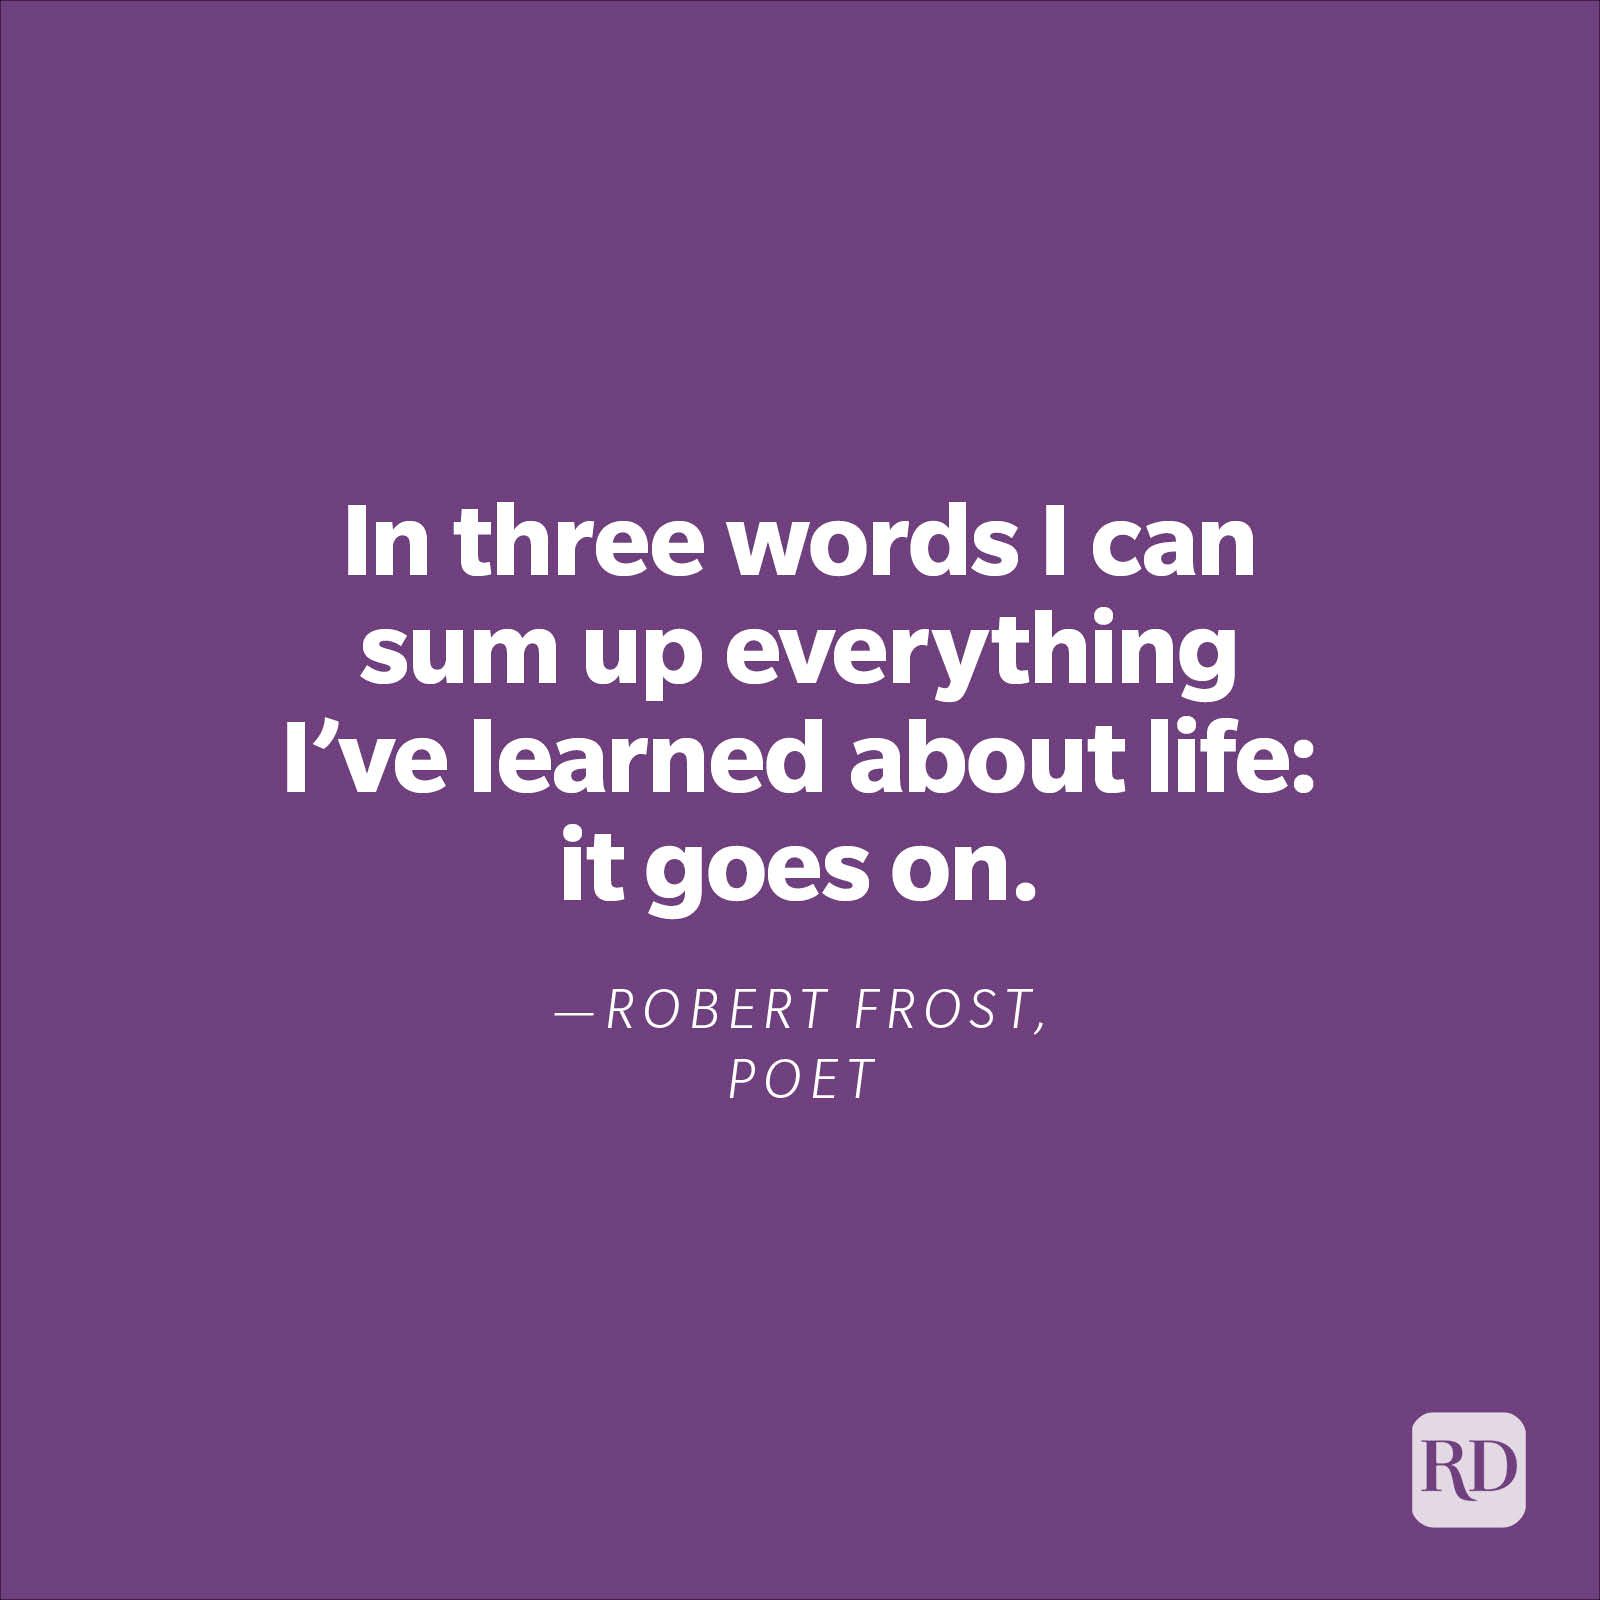 "In three words I can sum up everything I've learned about life: it goes on." —Robert Frost, poet